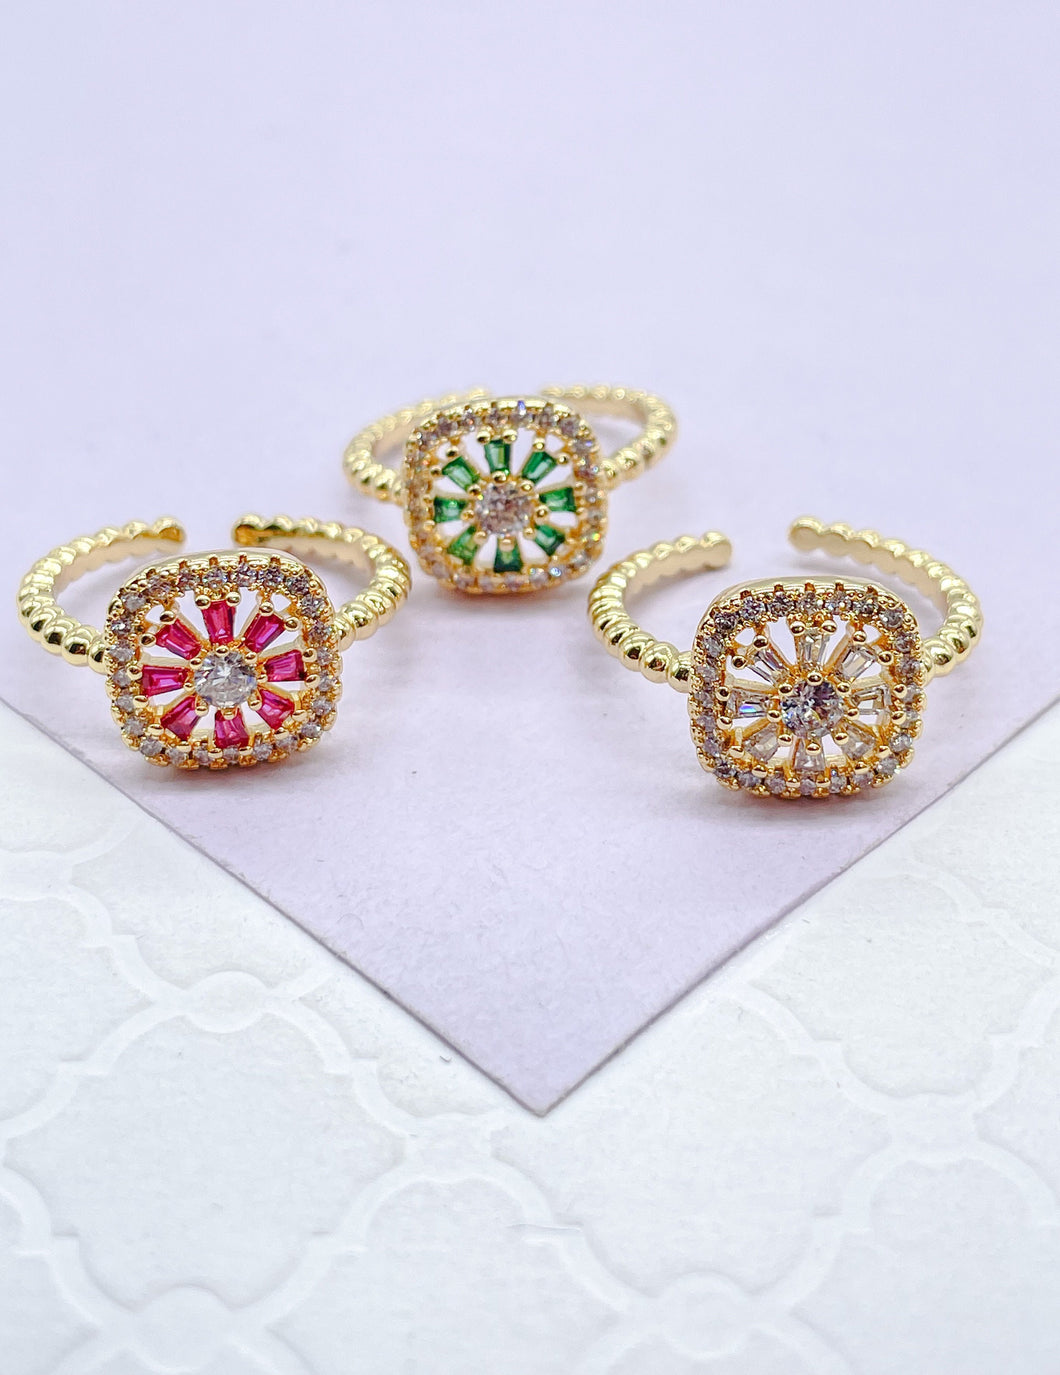 18k Gold Filled Adjustable Beaded Ring With Colorful Stones With Cz Round Stone in Center